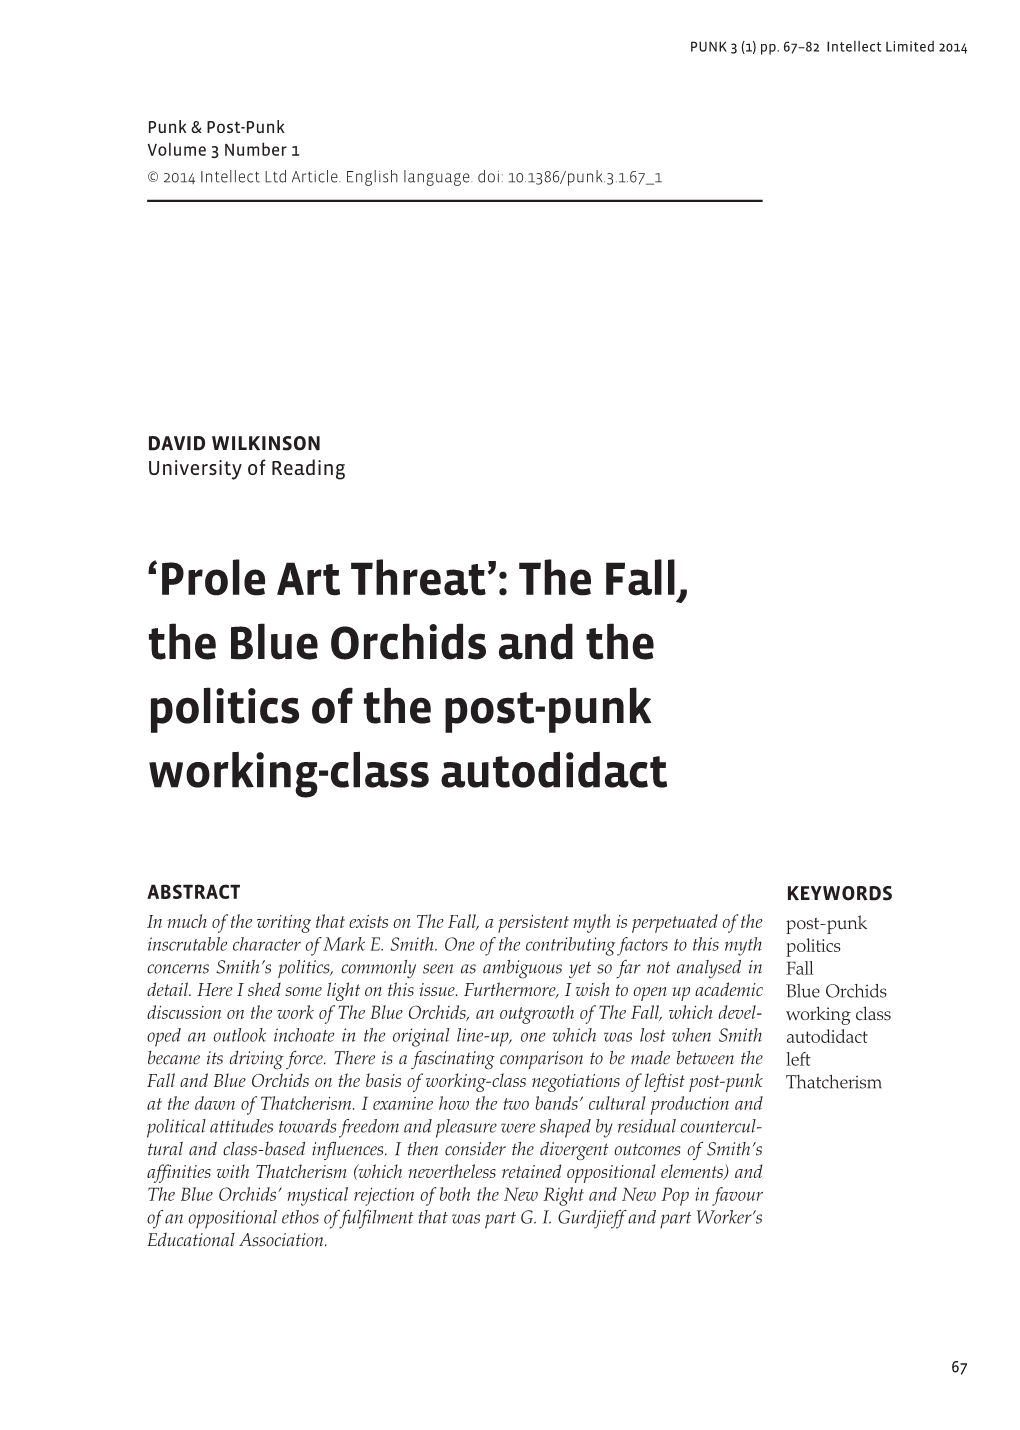 'Prole Art Threat': the Fall, the Blue Orchids and the Politics of the Post-Punk Working-Class Autodidact